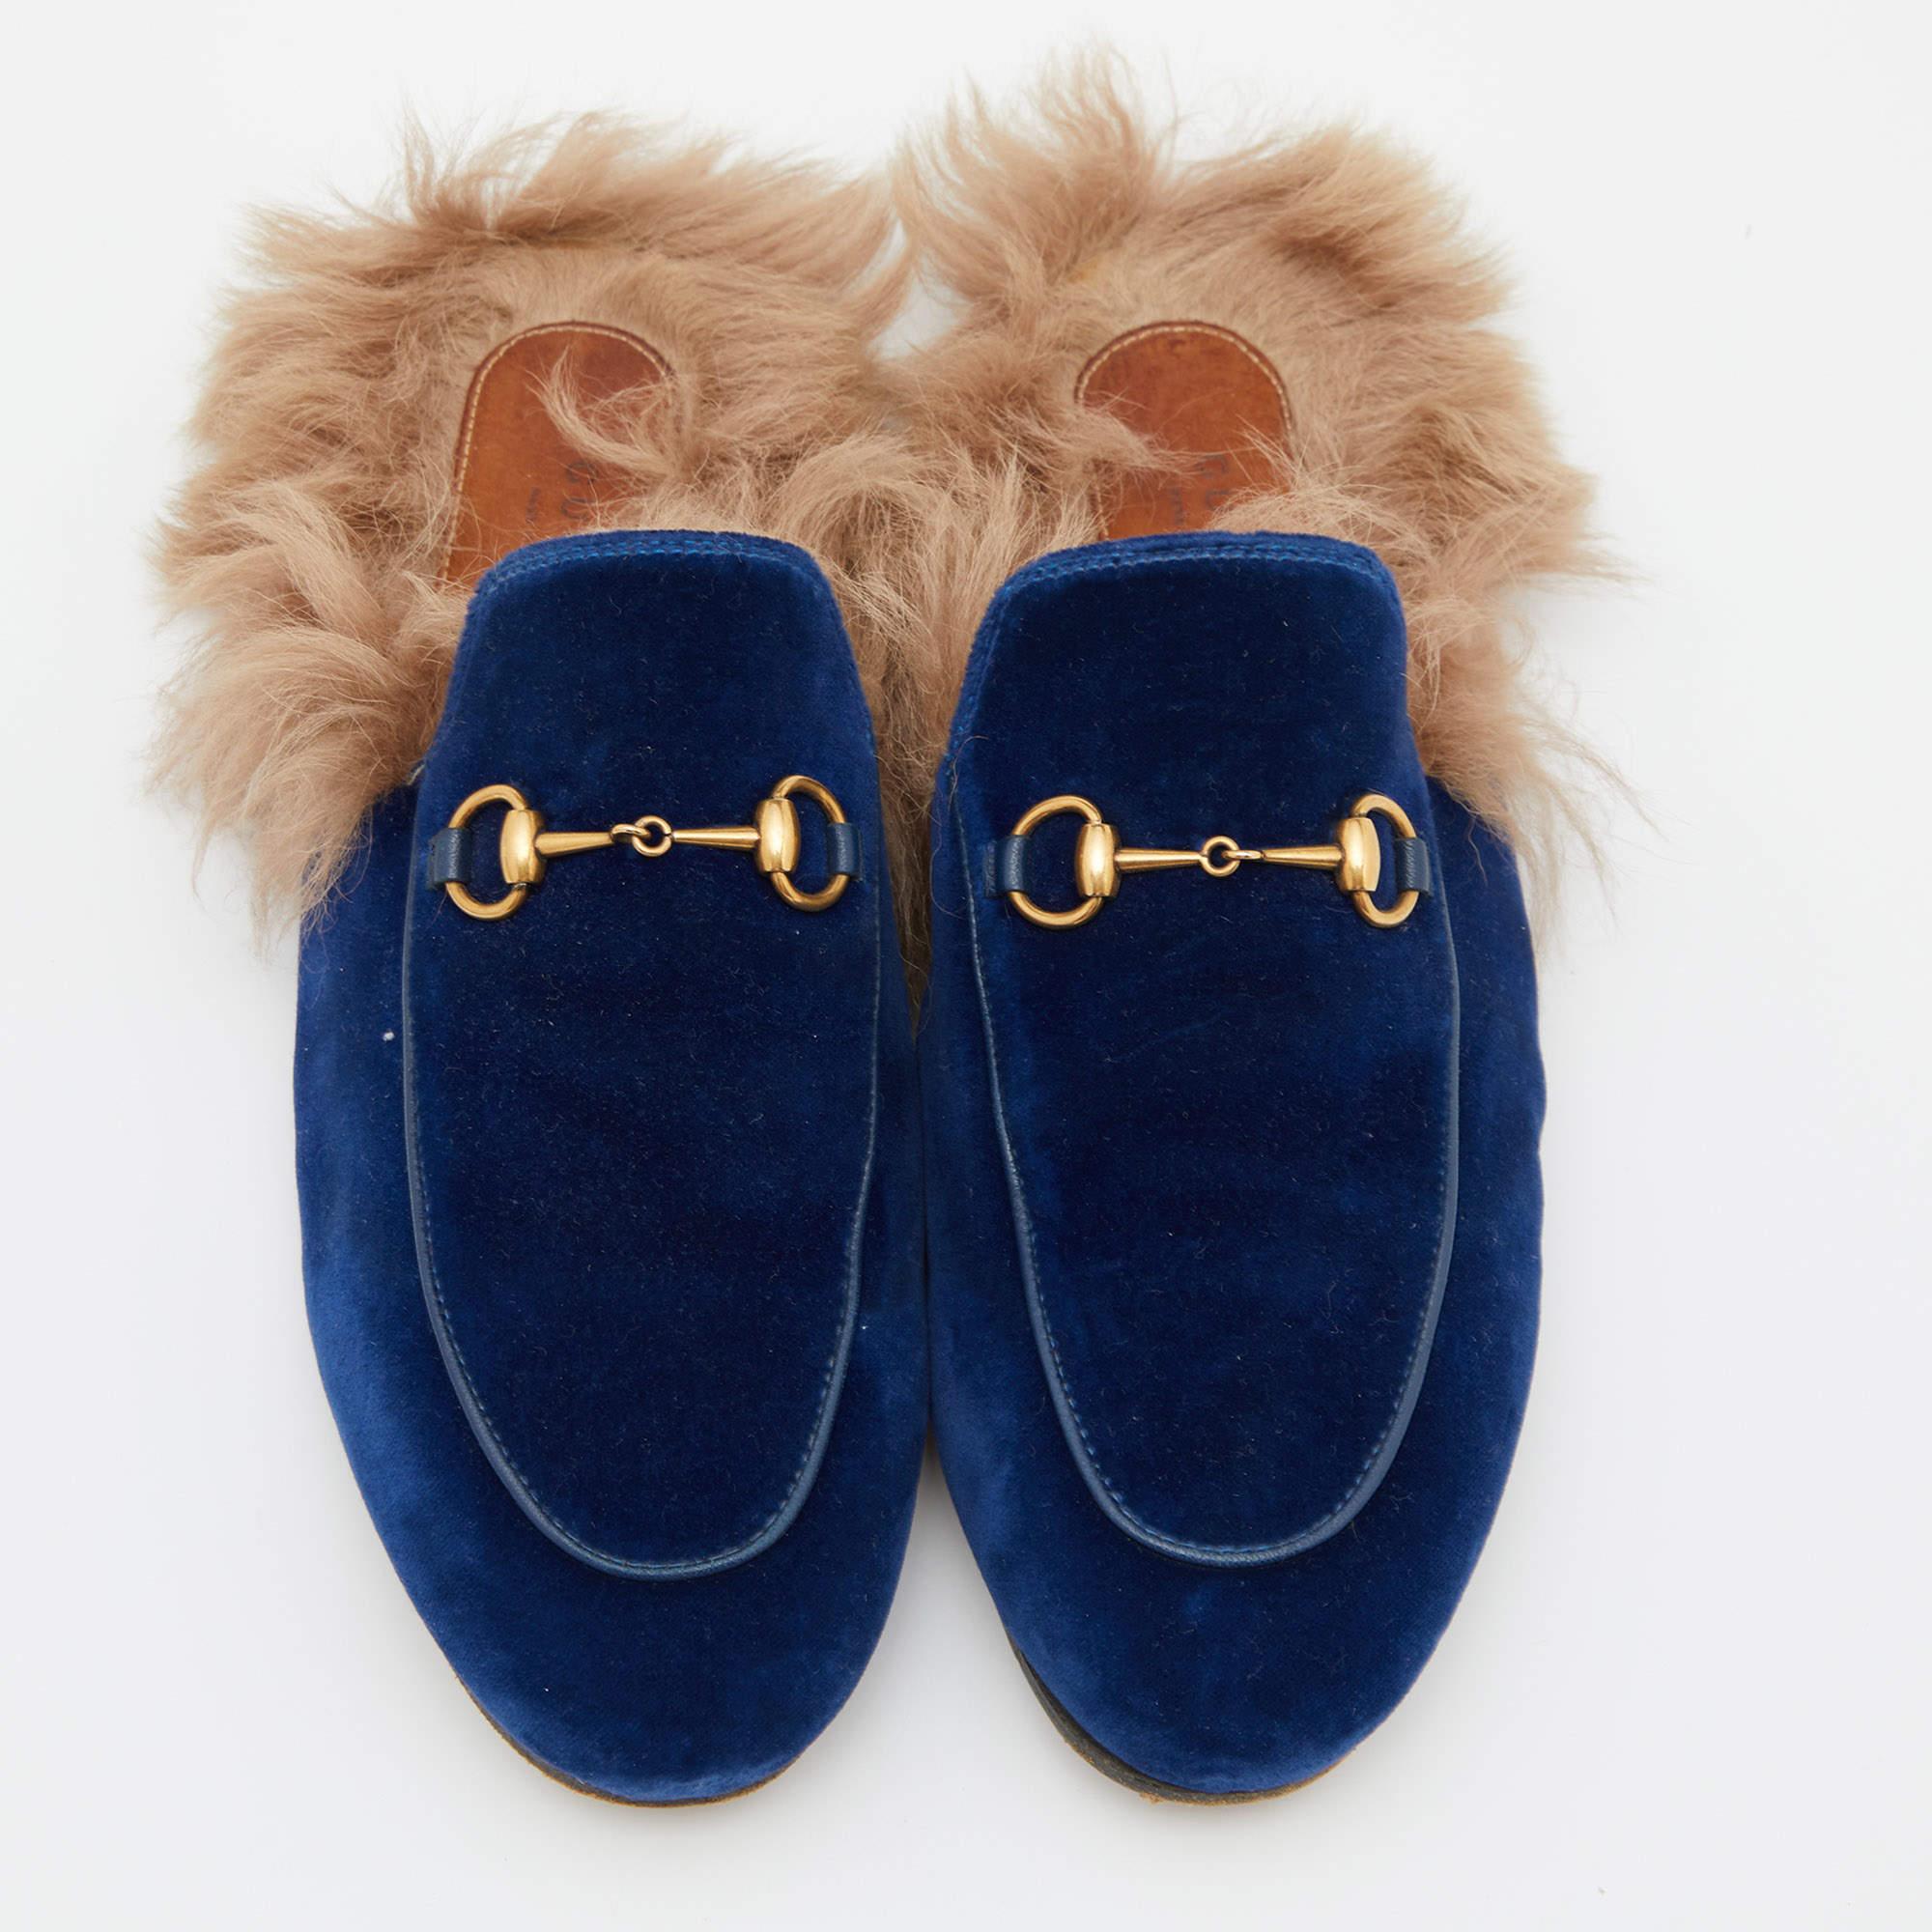 These Gucci Princetown mules signify luxury and practicality. An ultimate favorite of style enthusiasts, its silhouette gets a luxe update of fur lining.

